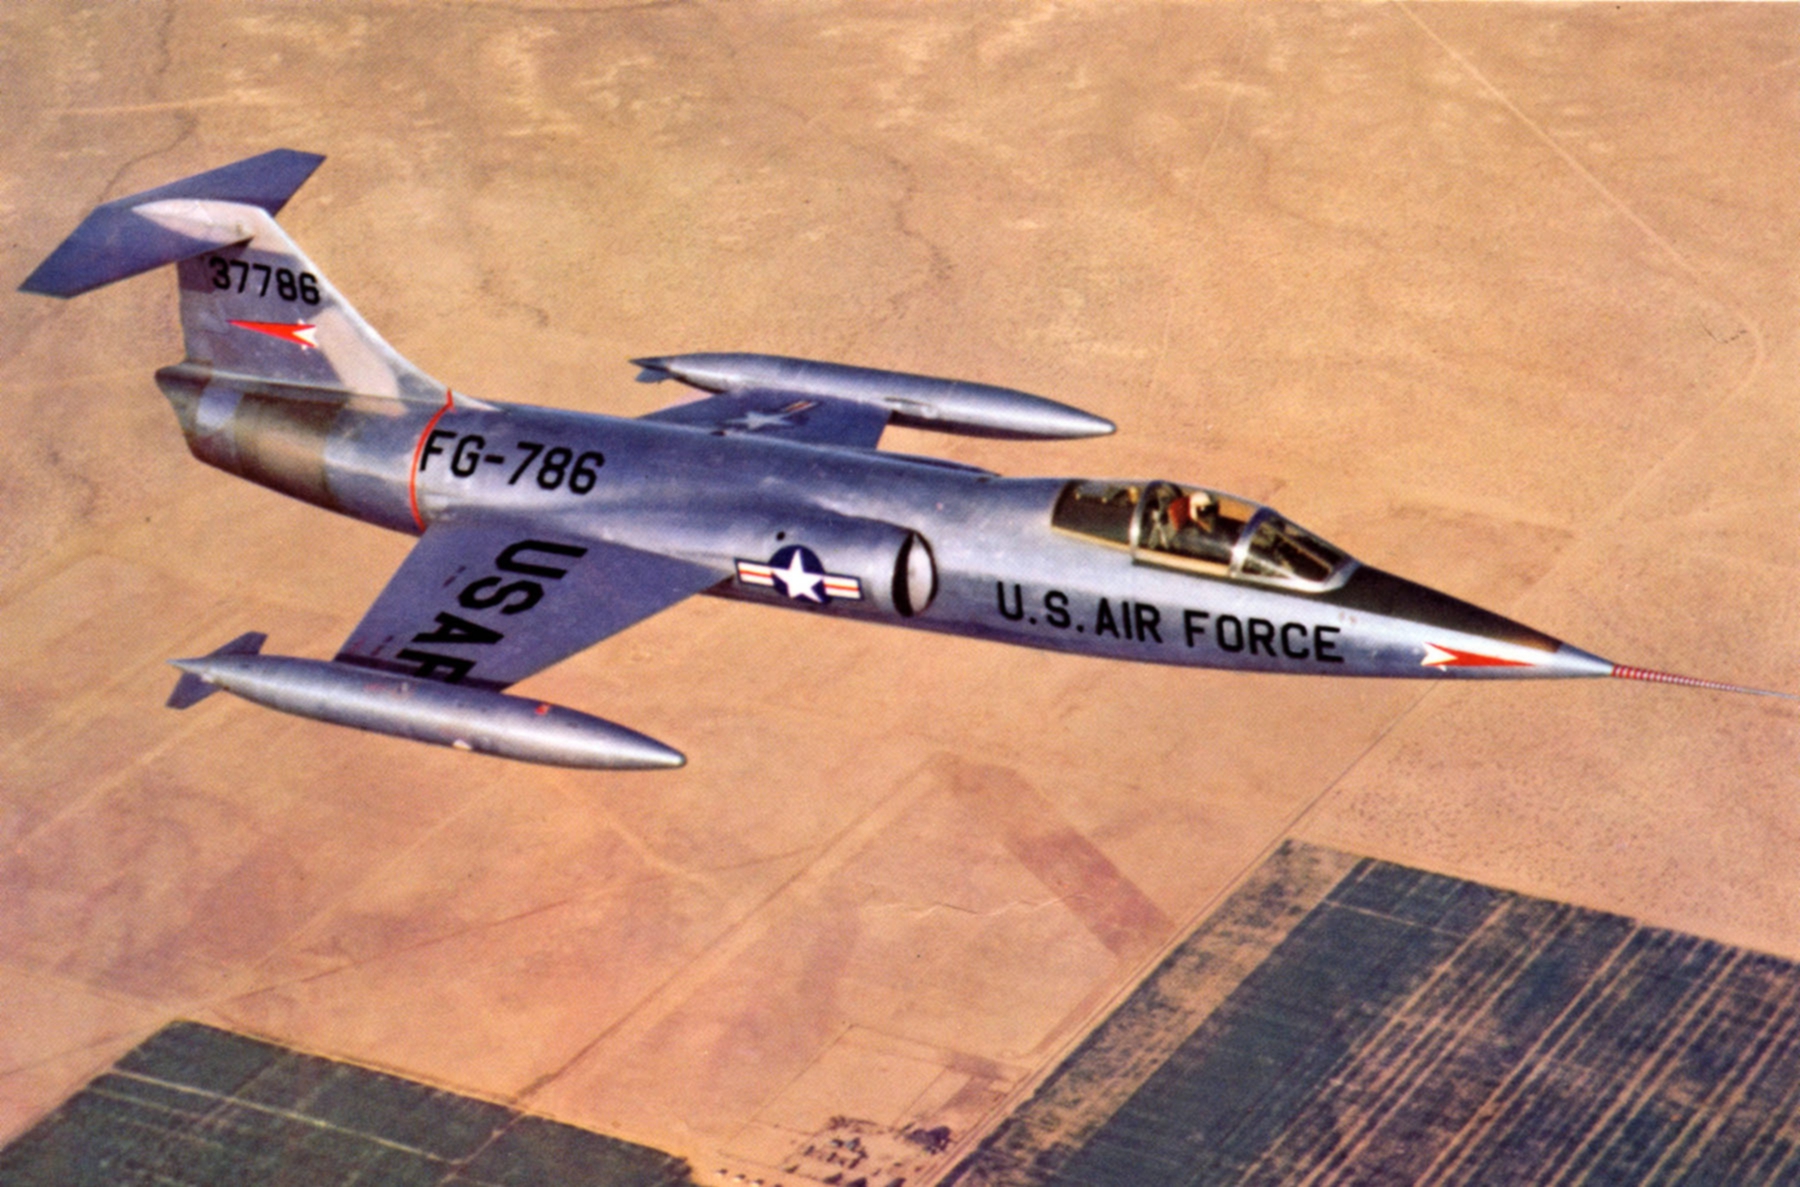 The first XF-104, serial number 53-7786, on a test flight near Edwards AFB. This aircraft crashed in 1957 following flutter problems which ripped the tail from the fuselage. The pilot, Bill Park, ejected safely. (image via Wikipedia)